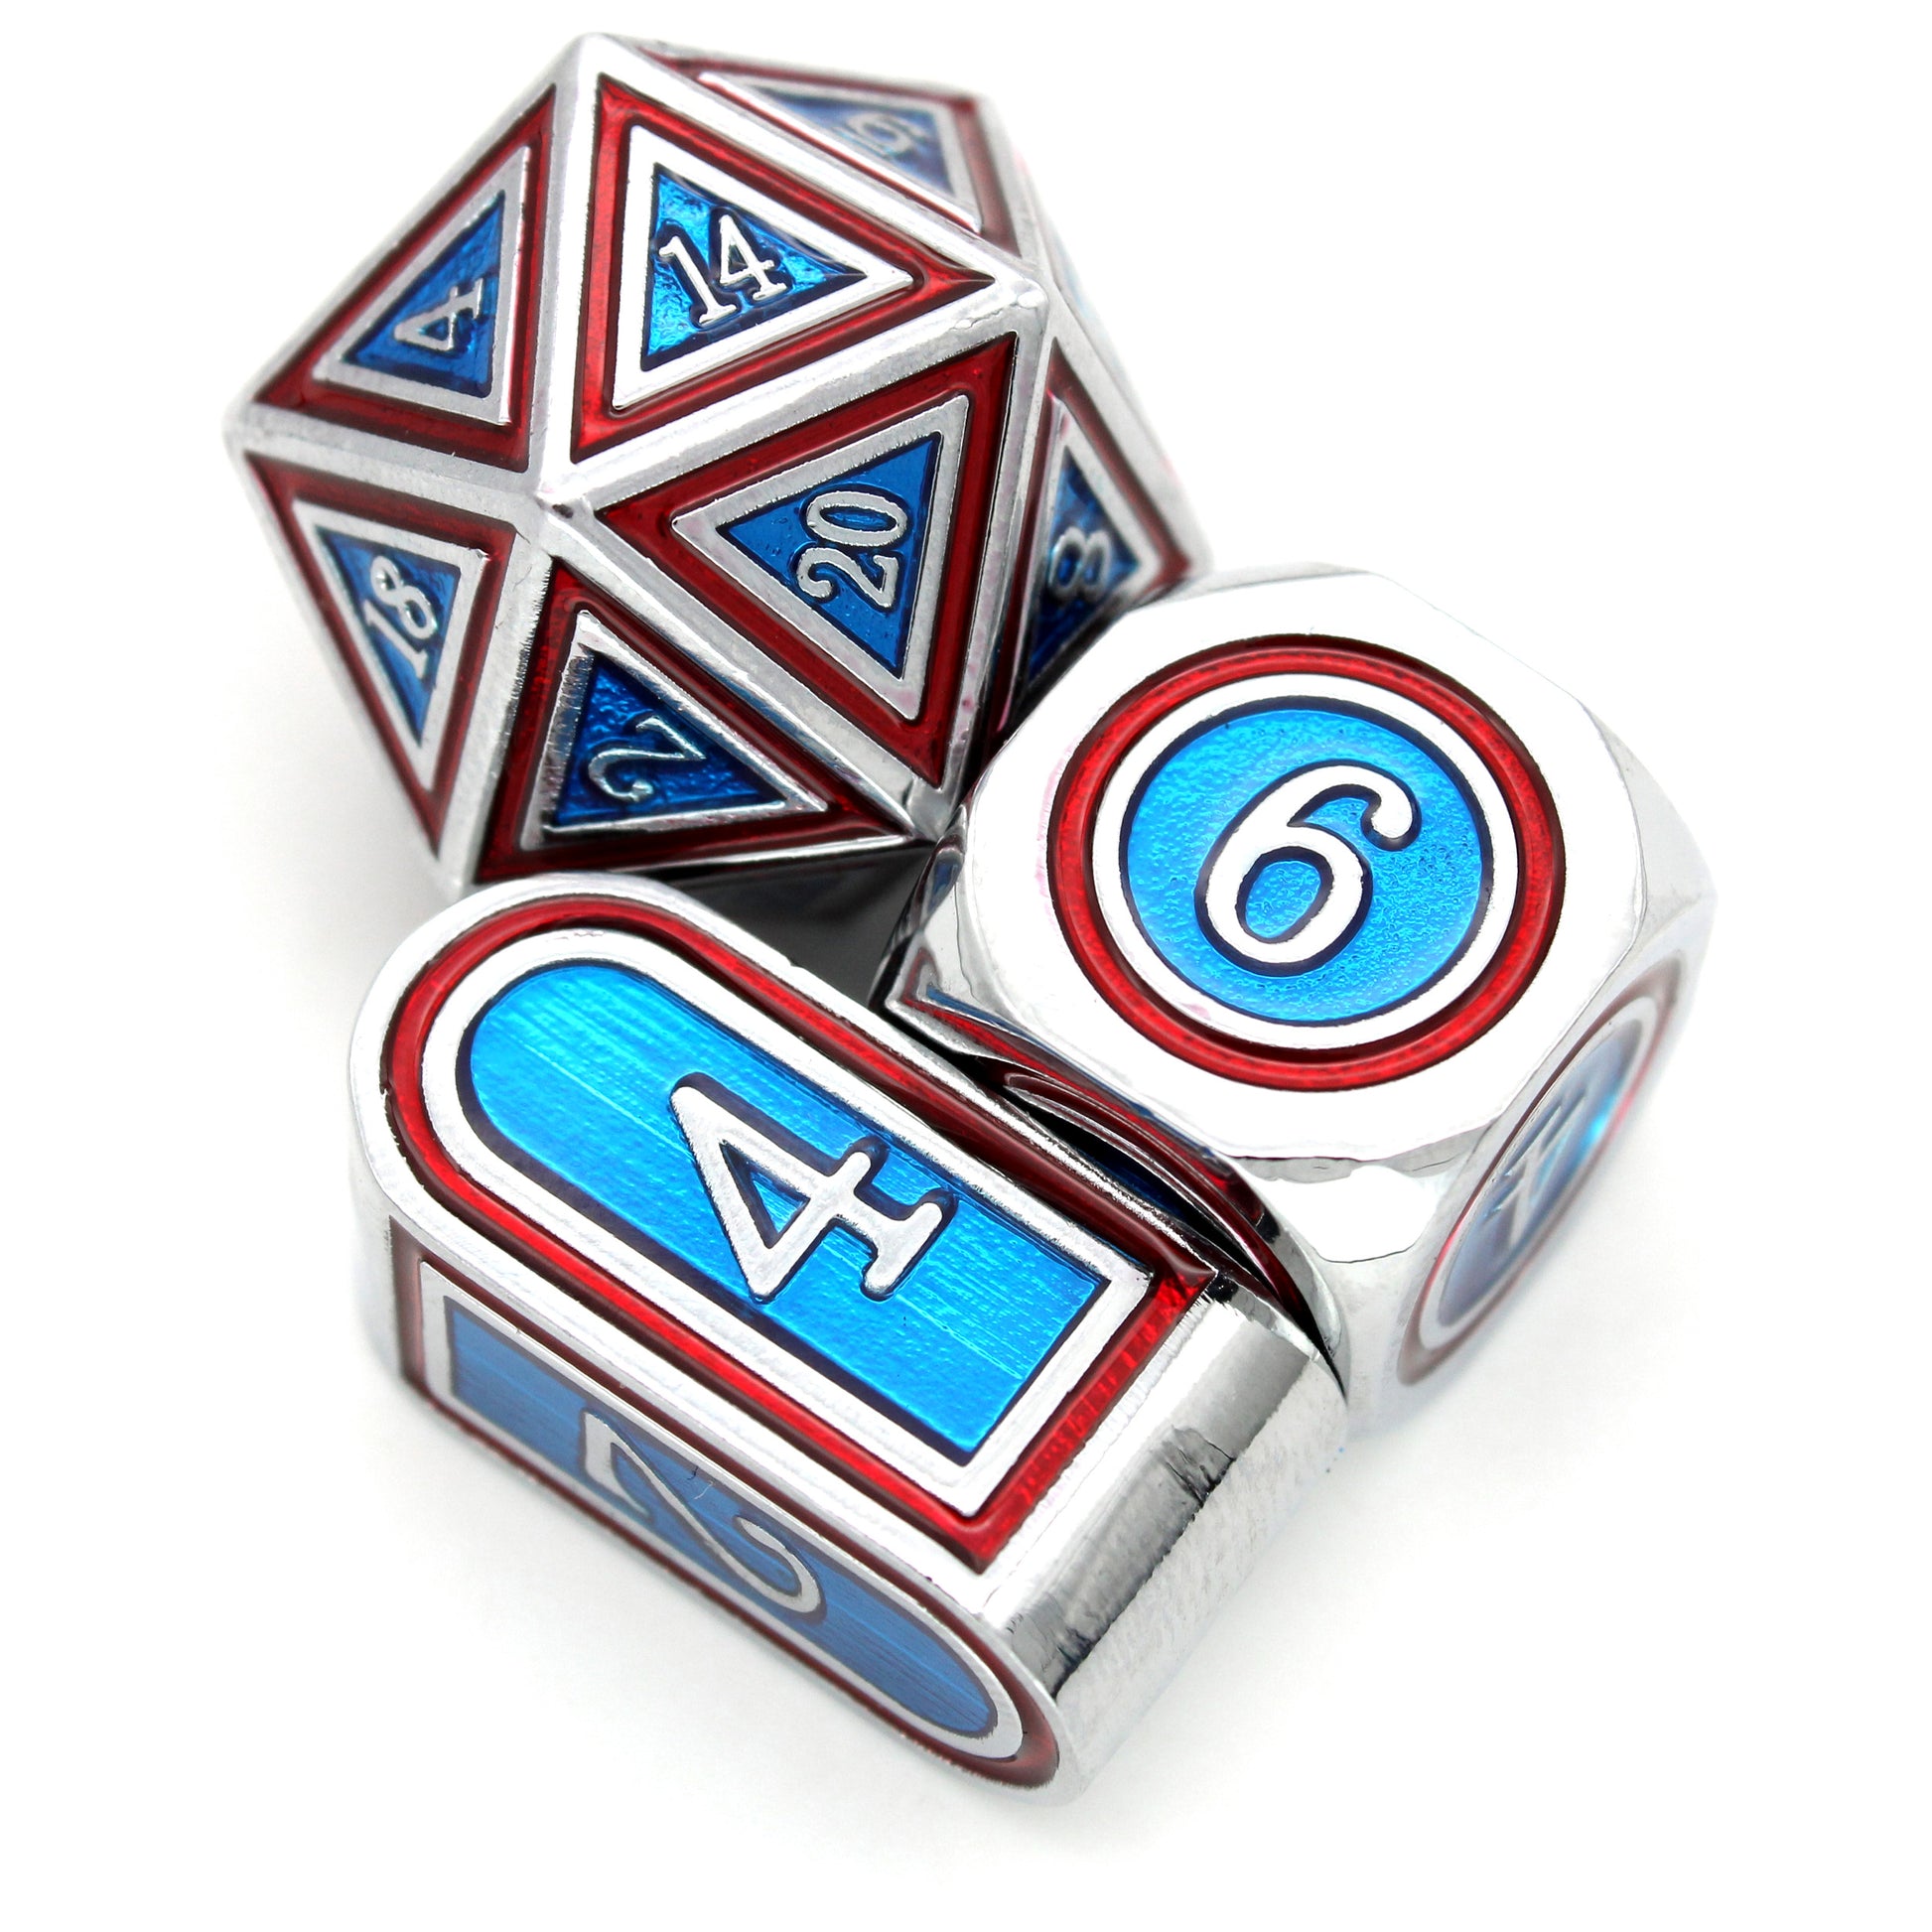 America's Ass is an 8-piece silver metal dice set with patriotic inlays of red and blue.